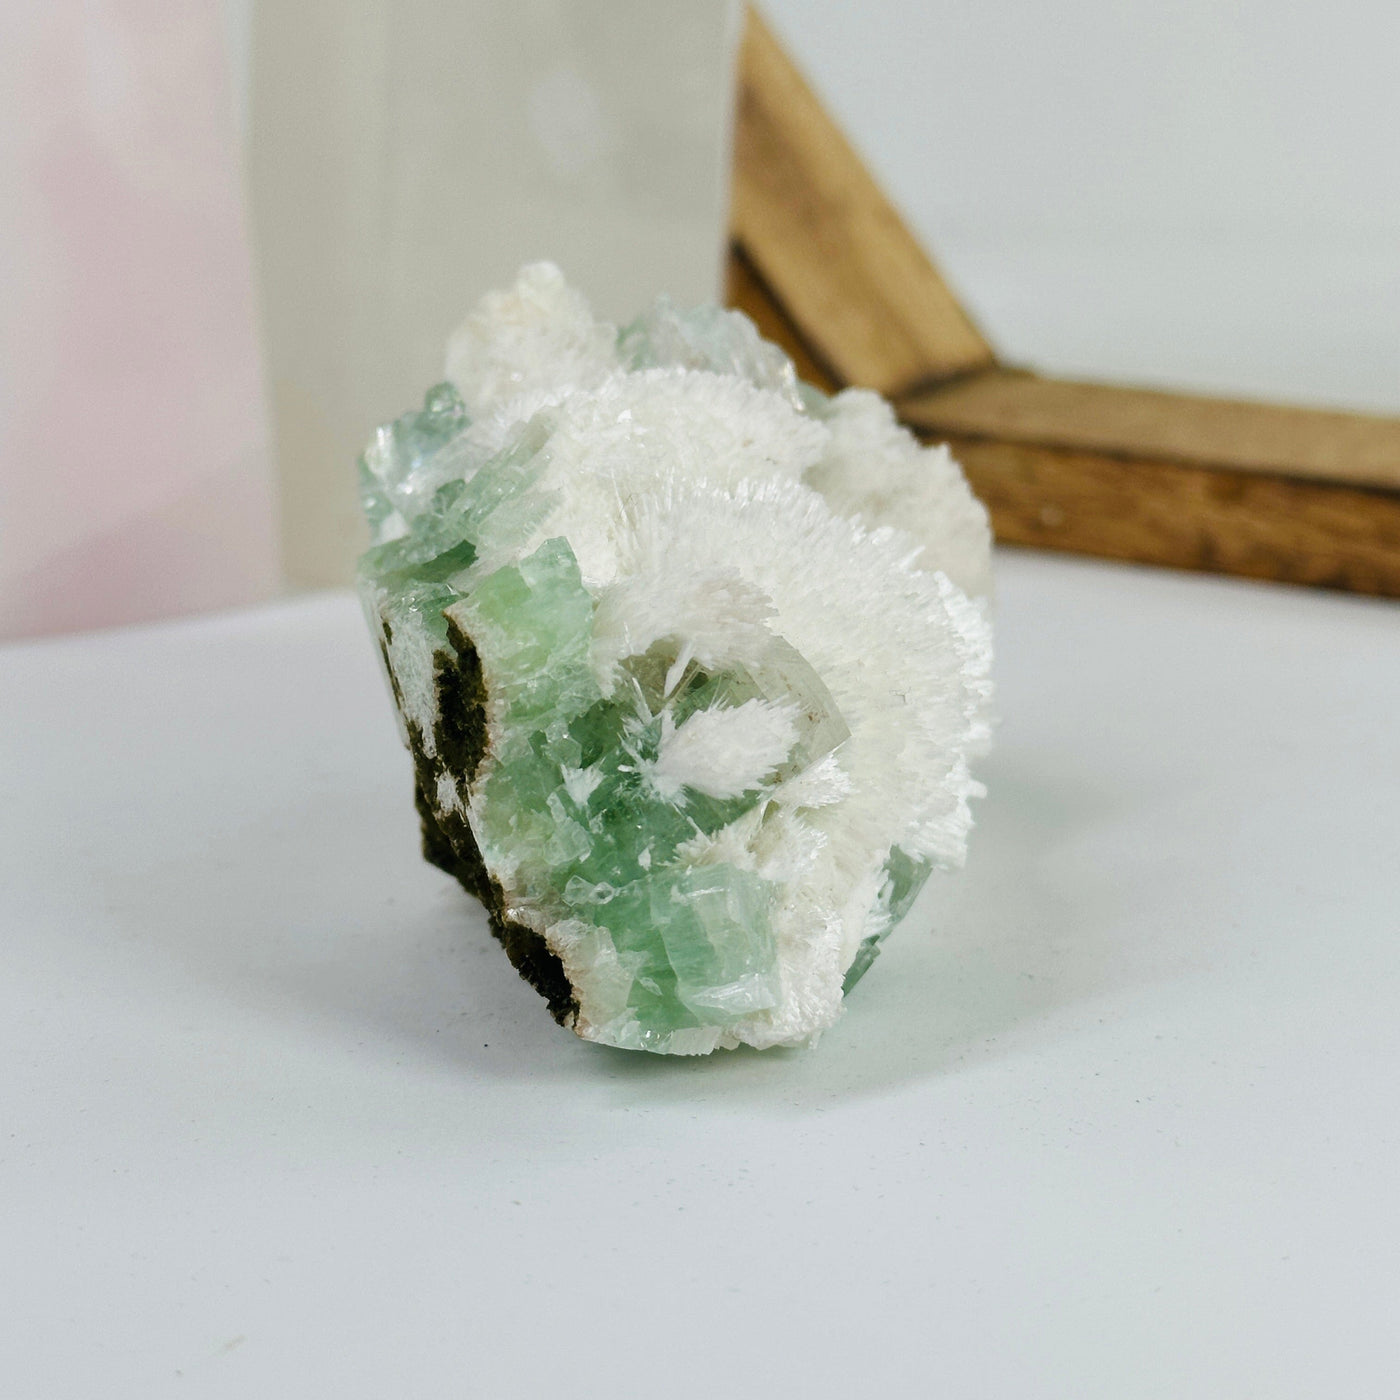 apophyllite with decorations in the background